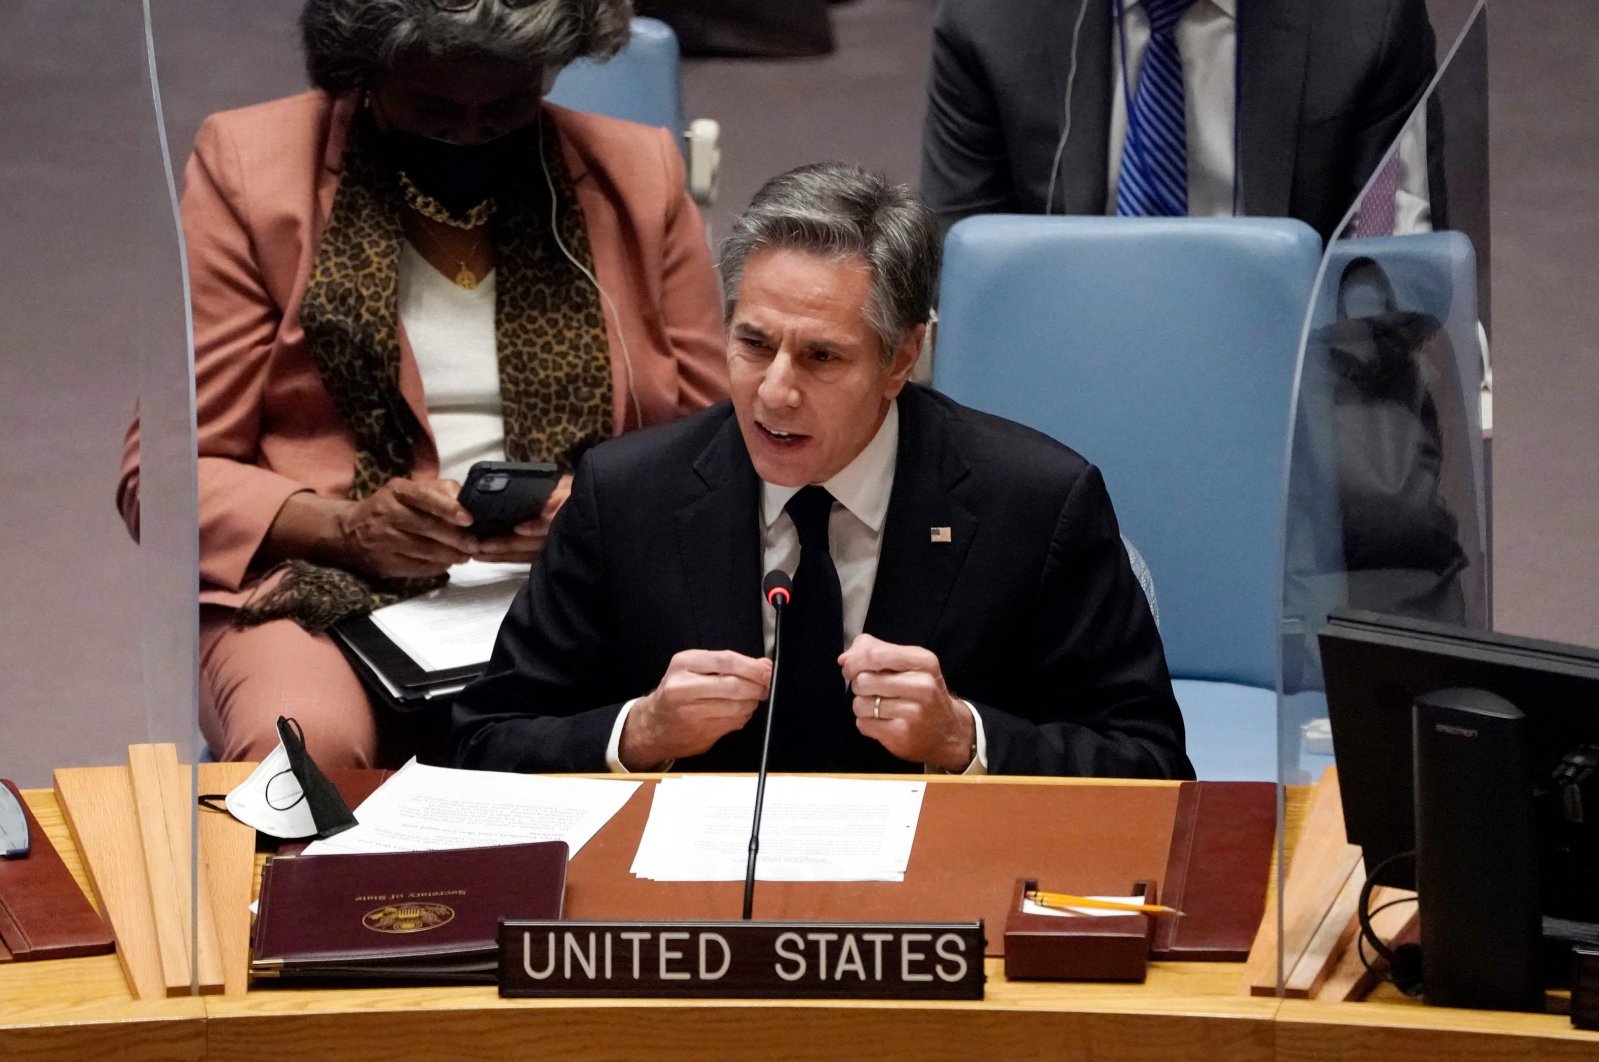 US Secretary of State Antony Blinken, with US Ambassador to the UN Linda Thomas-Greenfield (L), speaks at a UN Security Council meeting on Ukraine, on February 17, 2022, in New York. (AFP Photo)